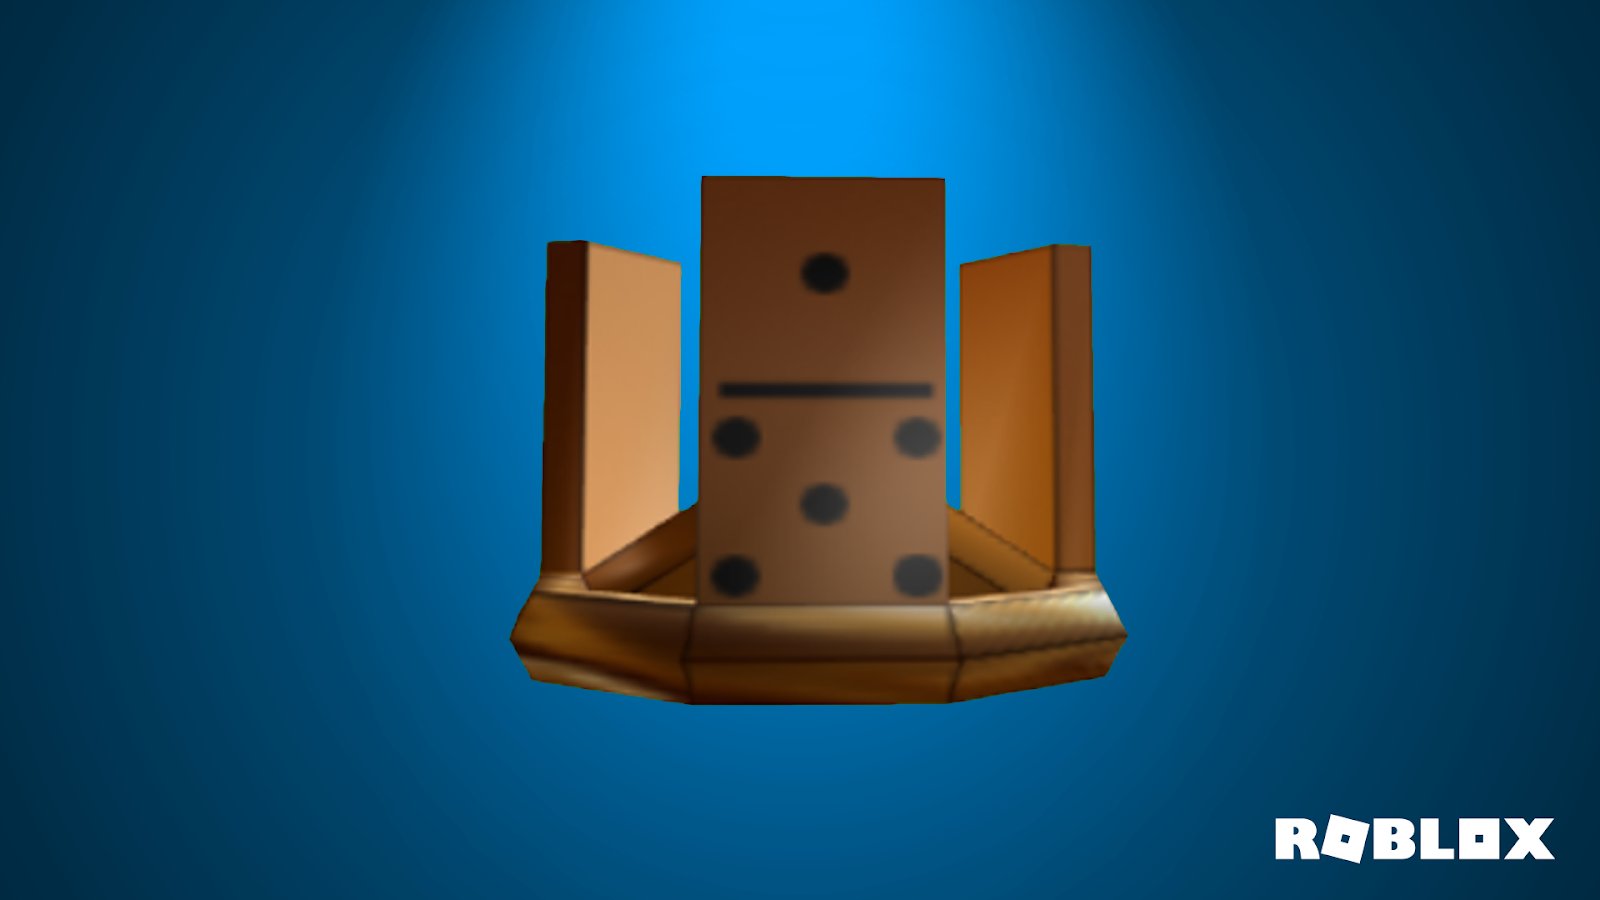 Roblox On Twitter The Domino Crown One Of The Rarest Hats On Roblox Was Awarded During The Domino Rally Building Competition Back In 2007 How Would You Style Your Avatar Wearing A - roblox domino crown texture